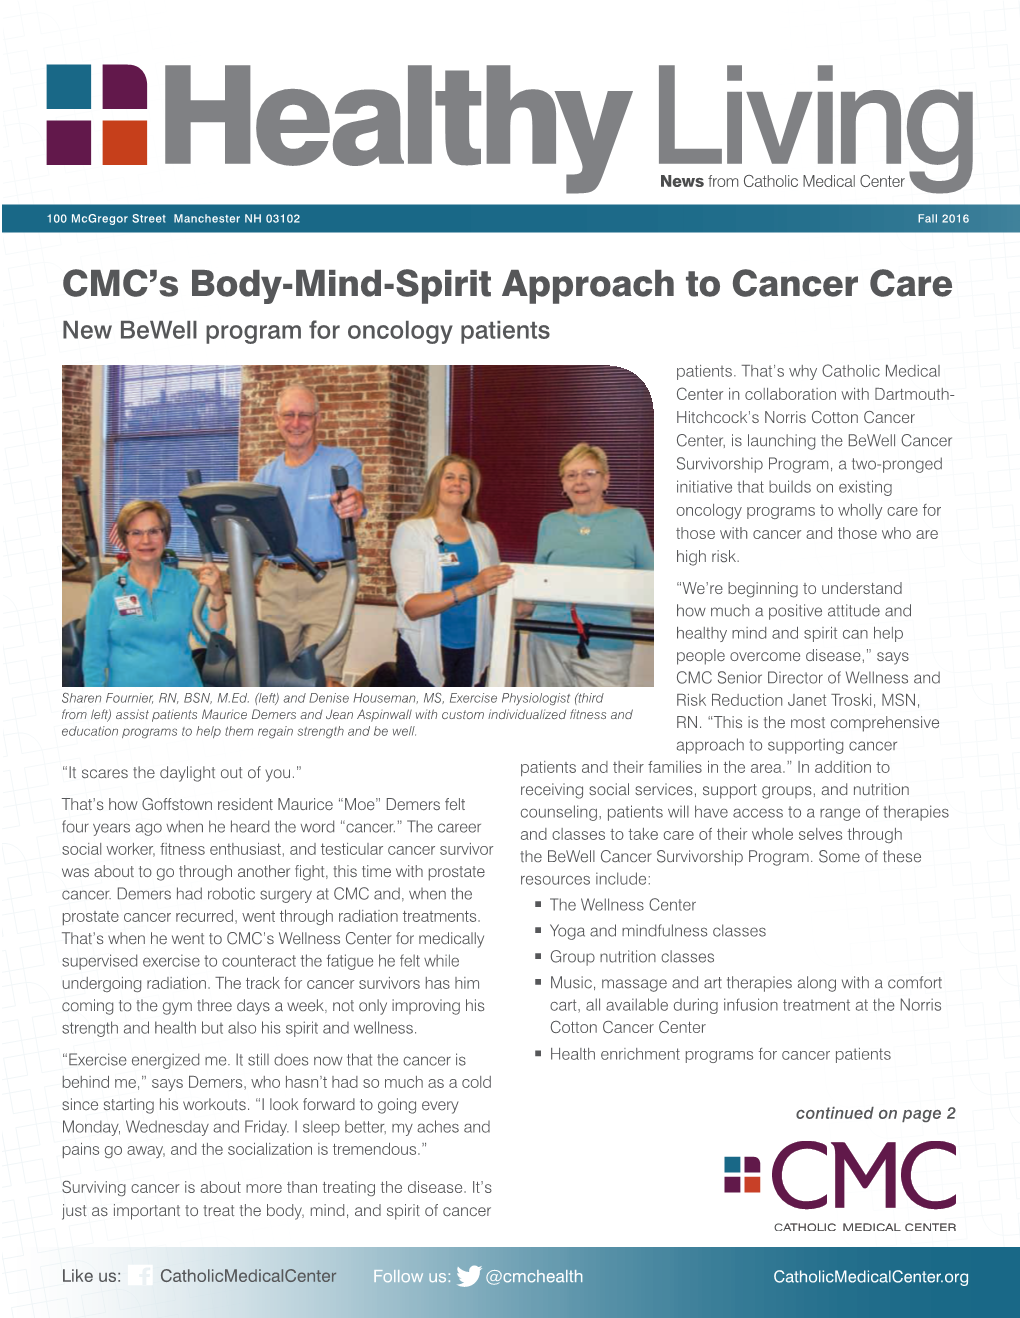 CMC's Body-Mind-Spirit Approach to Cancer Care